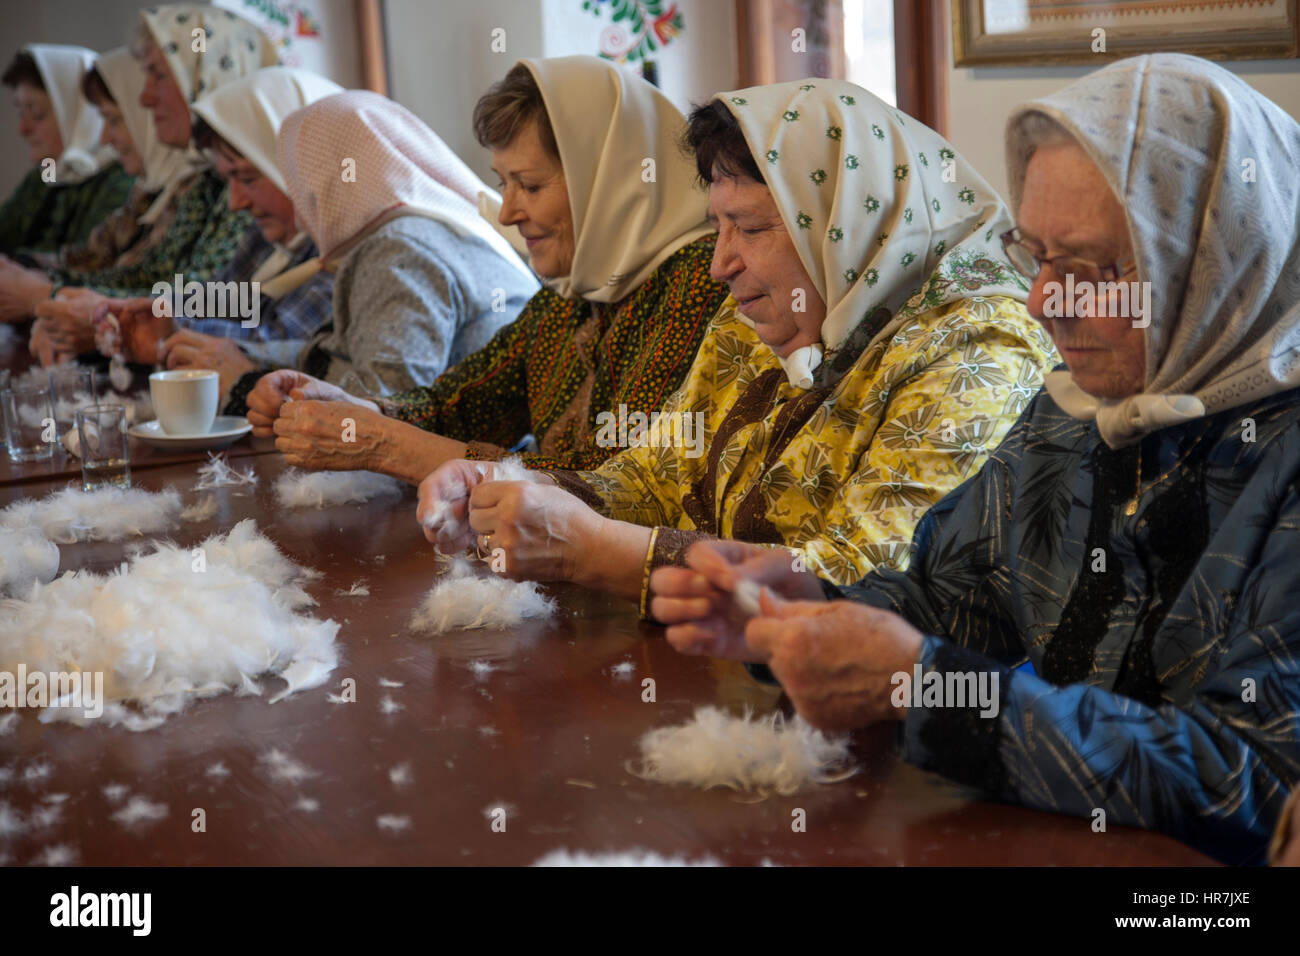 Women pluck goose feathers for use in pillows and duvets Stock Photo